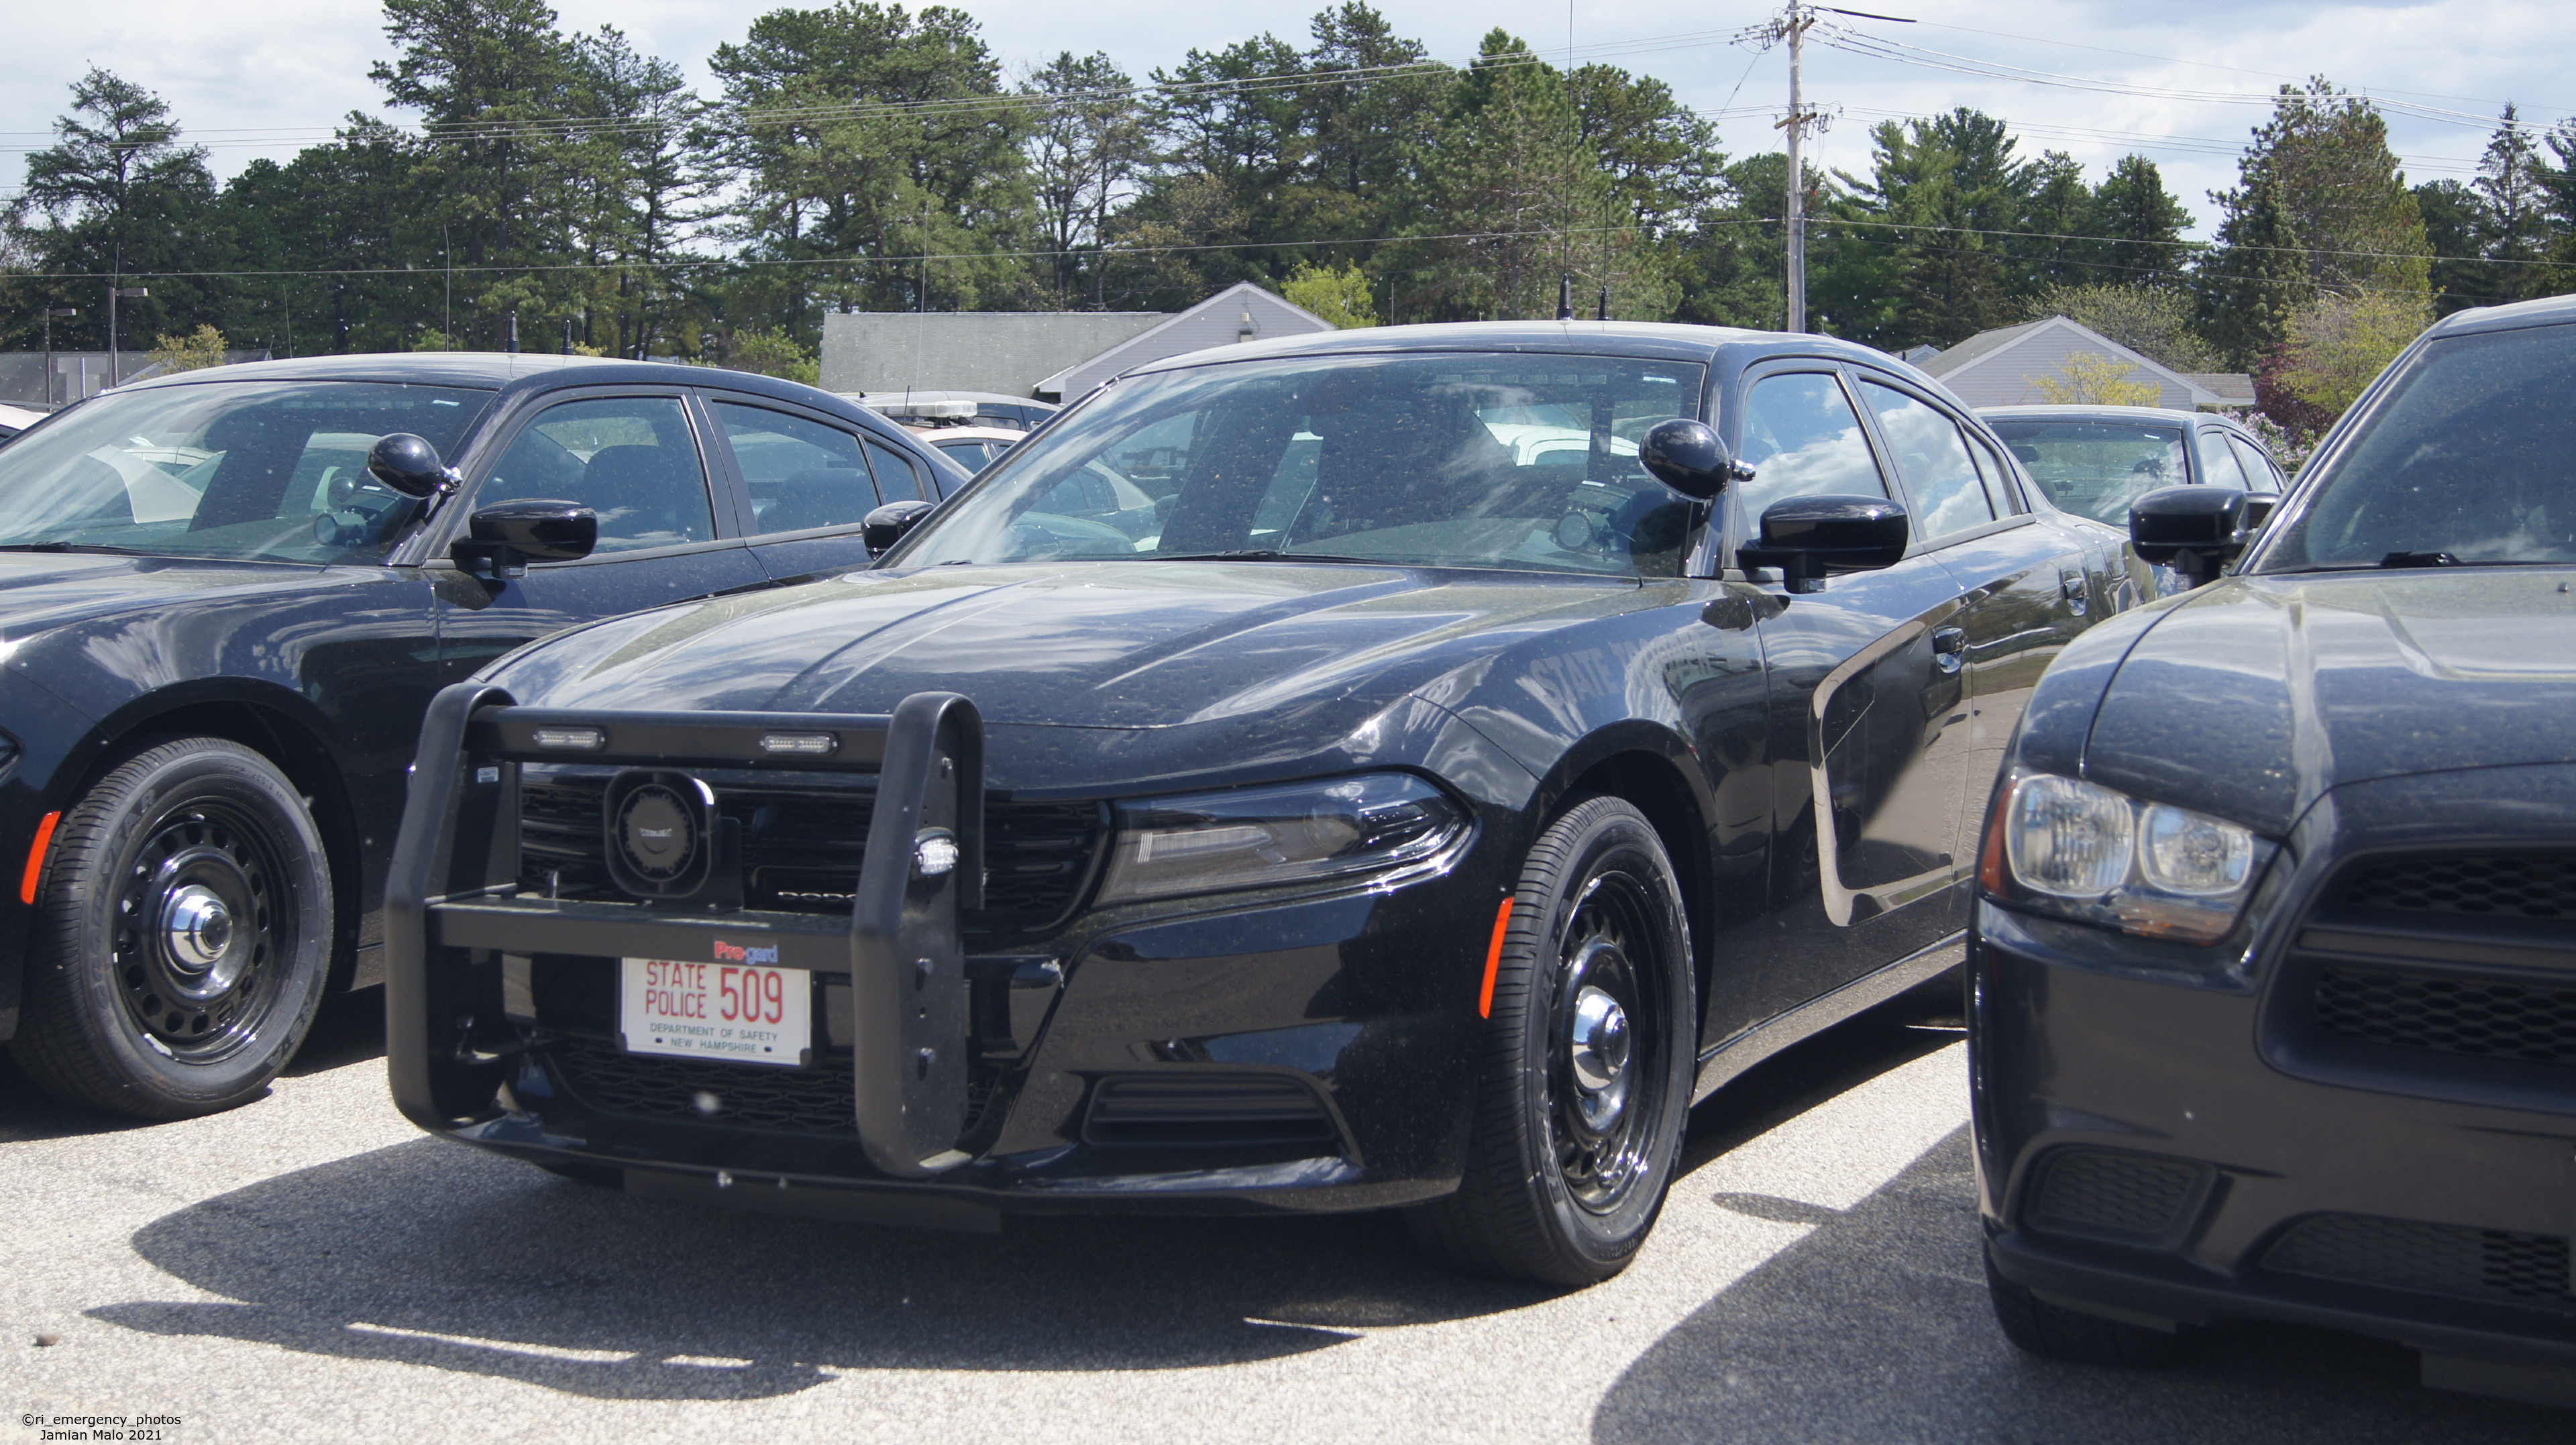 A photo  of New Hampshire State Police
            Cruiser 509, a 2020 Dodge Charger             taken by Jamian Malo